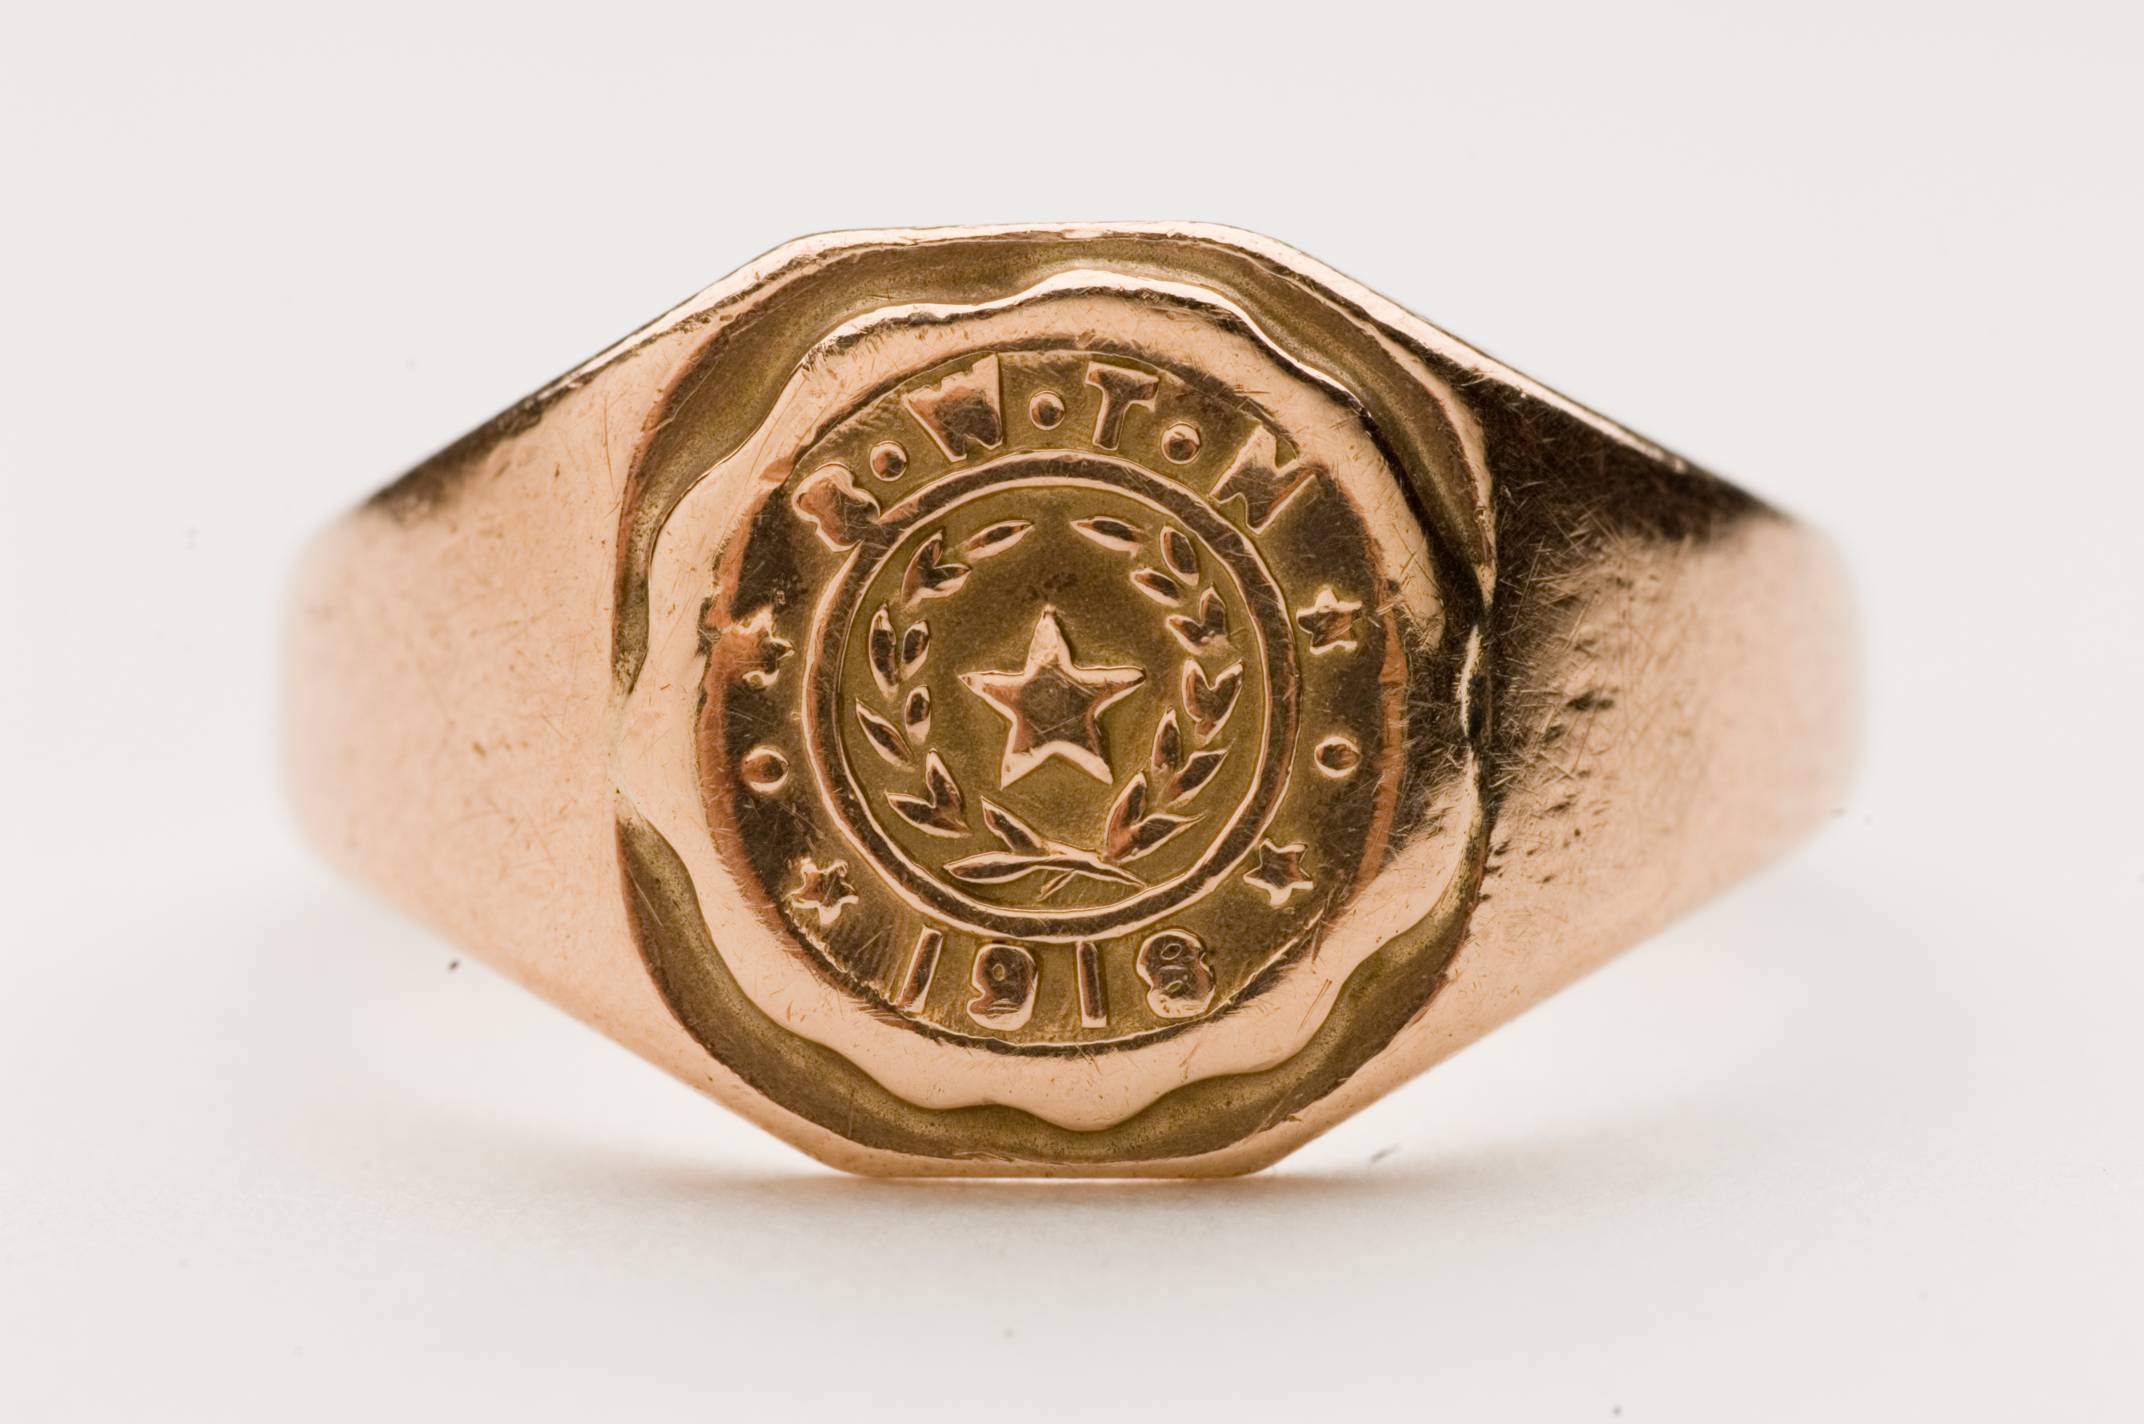 Photograph of the 1918 class ring with the seal in the center of the frame